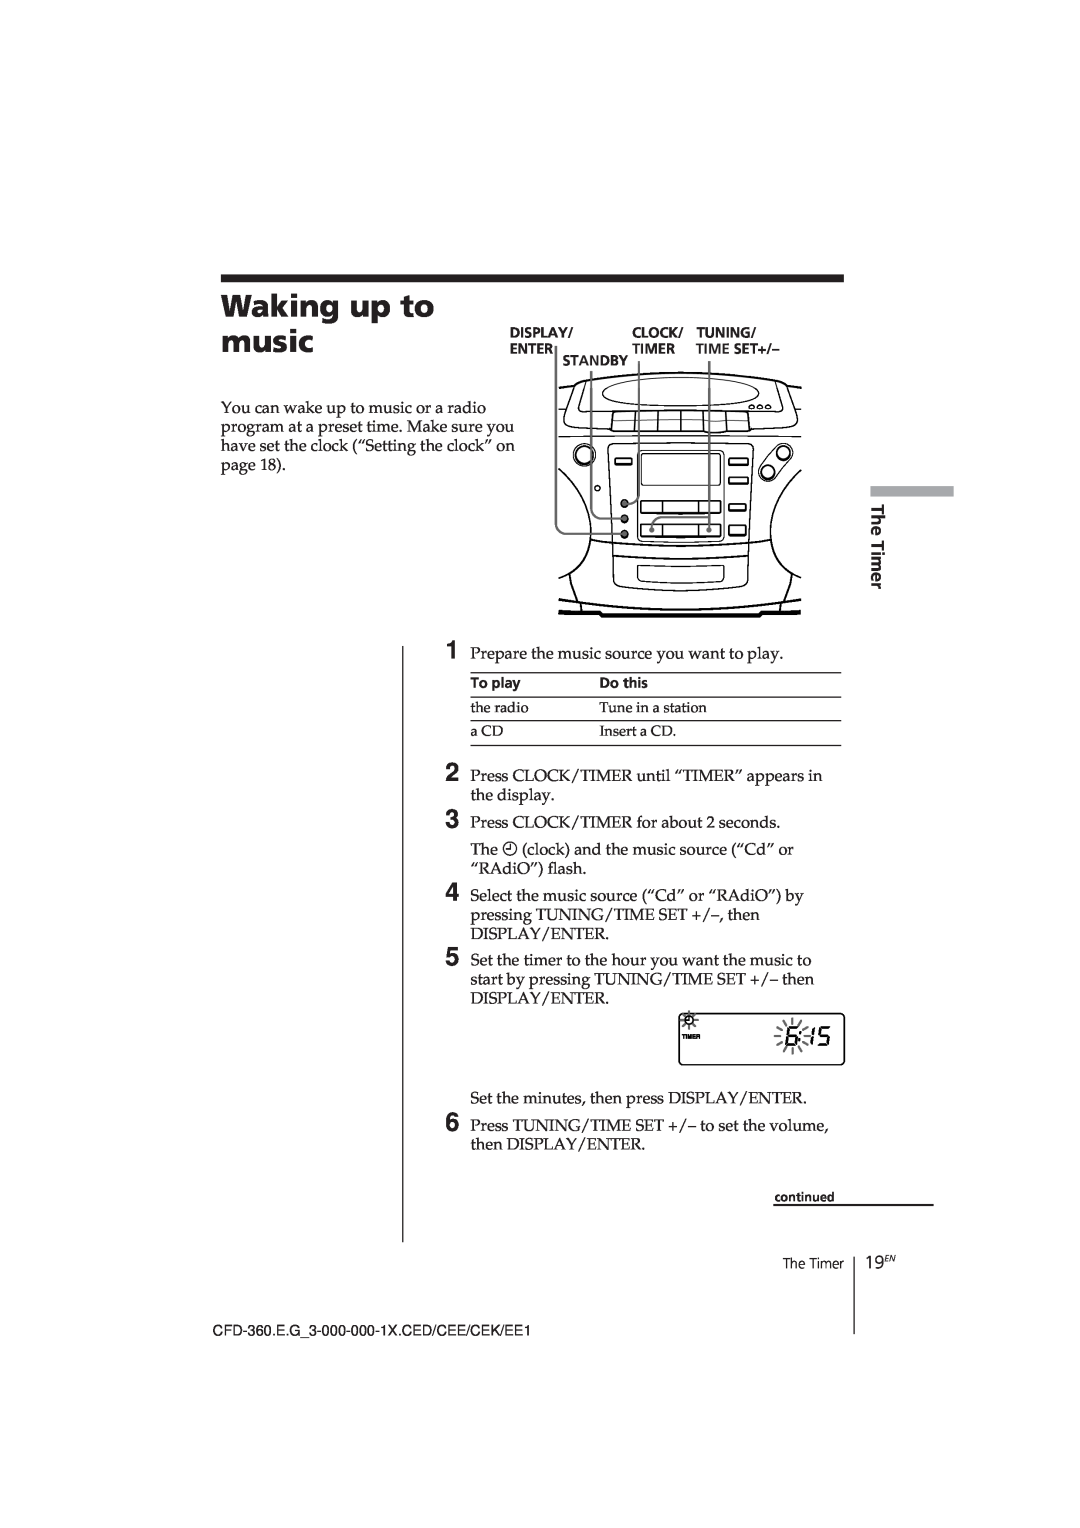 Sony CFD-360 operating instructions Waking up to music, 19EN 